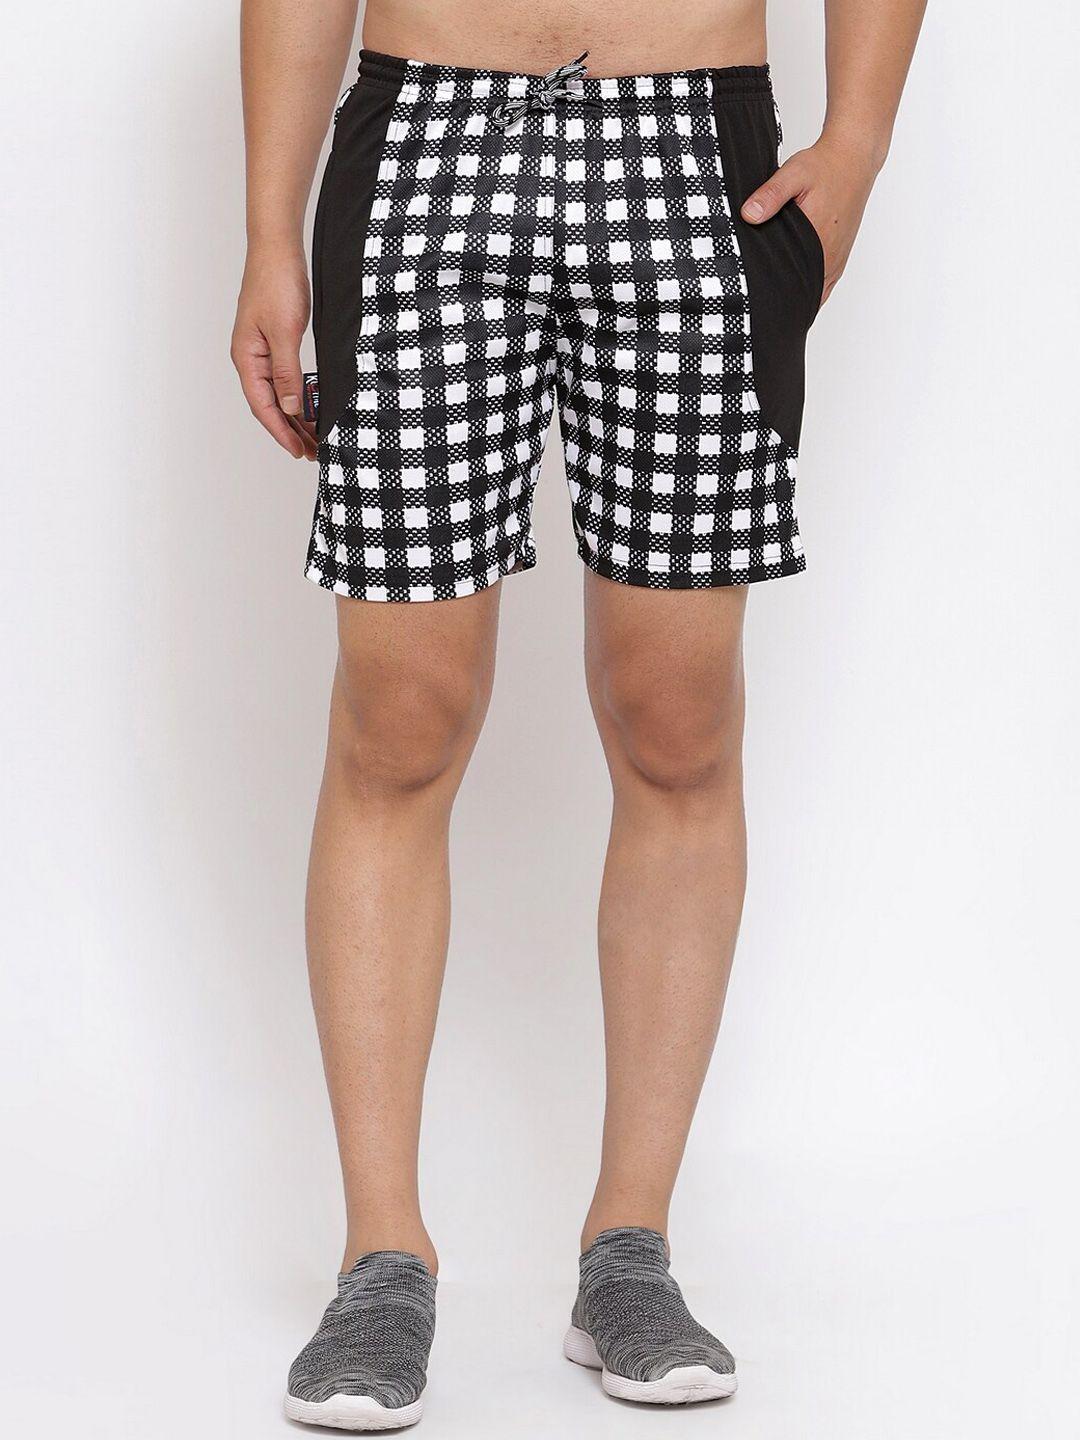 klotthe men checked mid rise sport shorts with rapid dry technology